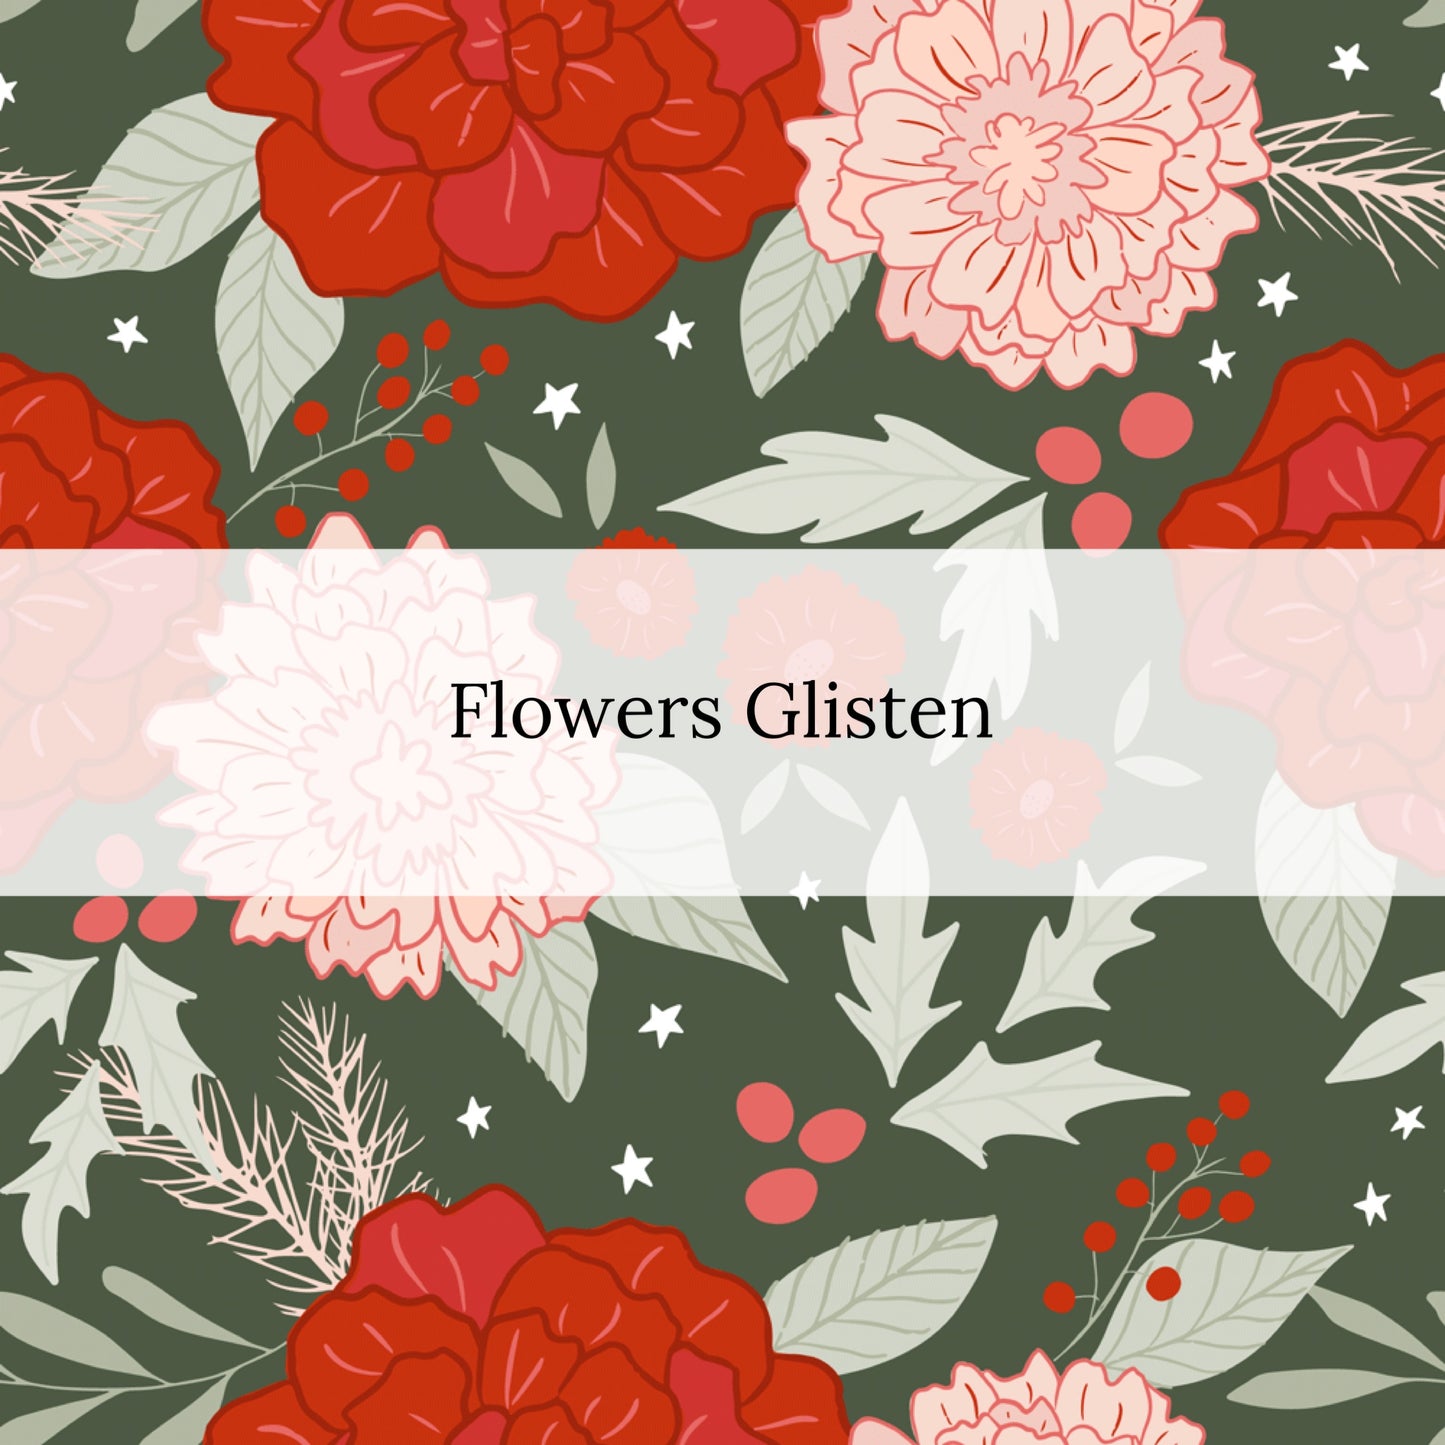 Green background with red and light pink illustrations